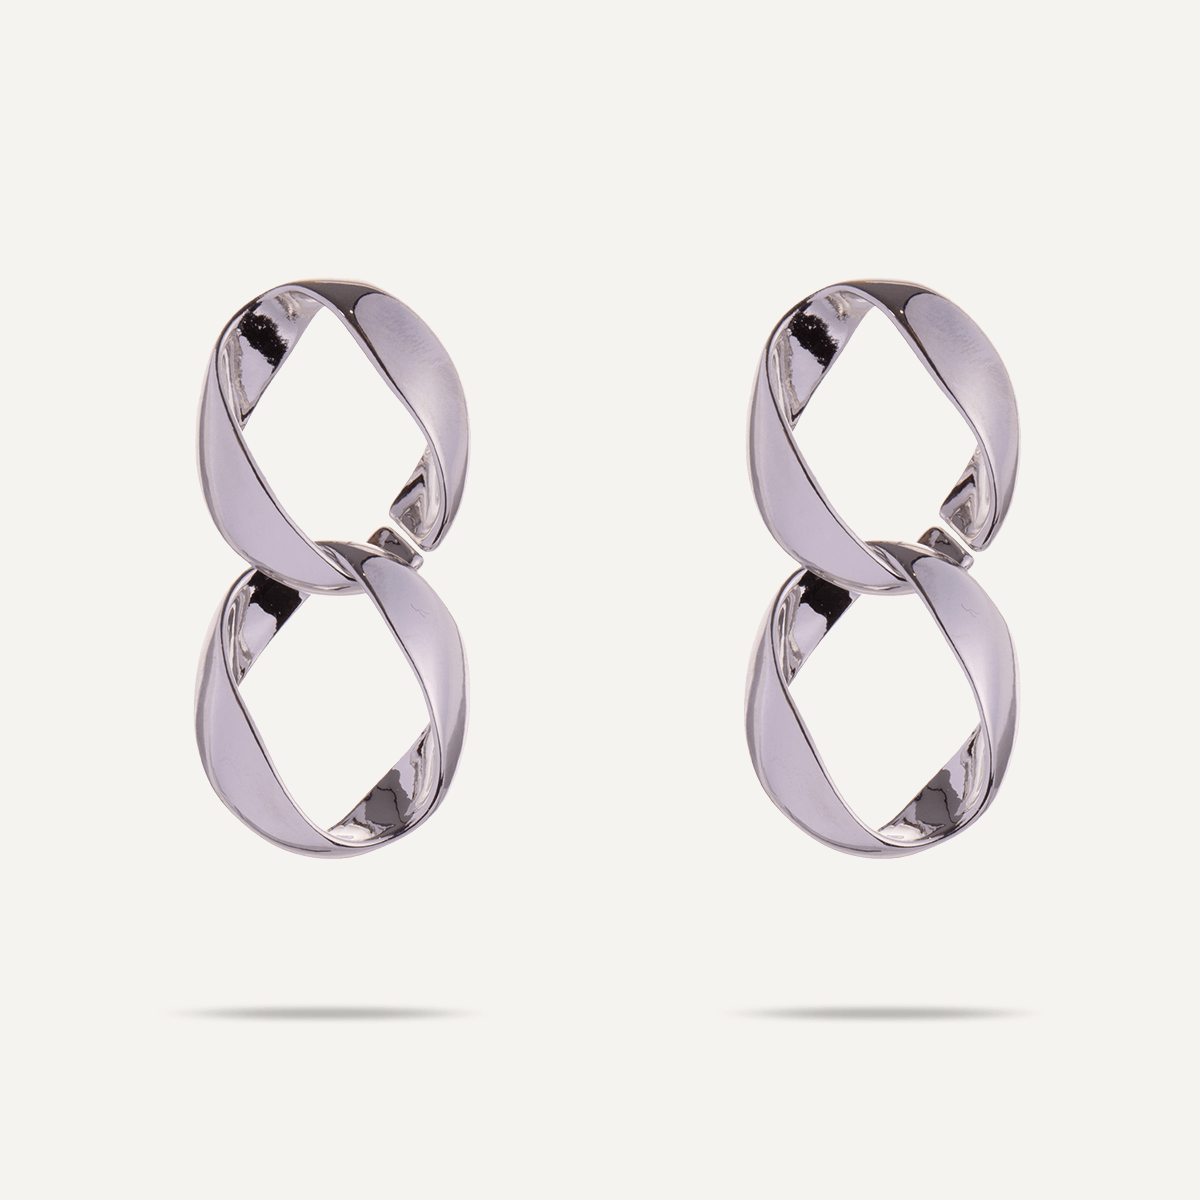 Zaha Abstract Twisted Circles Drop Earrings in Silver - D&X Retail